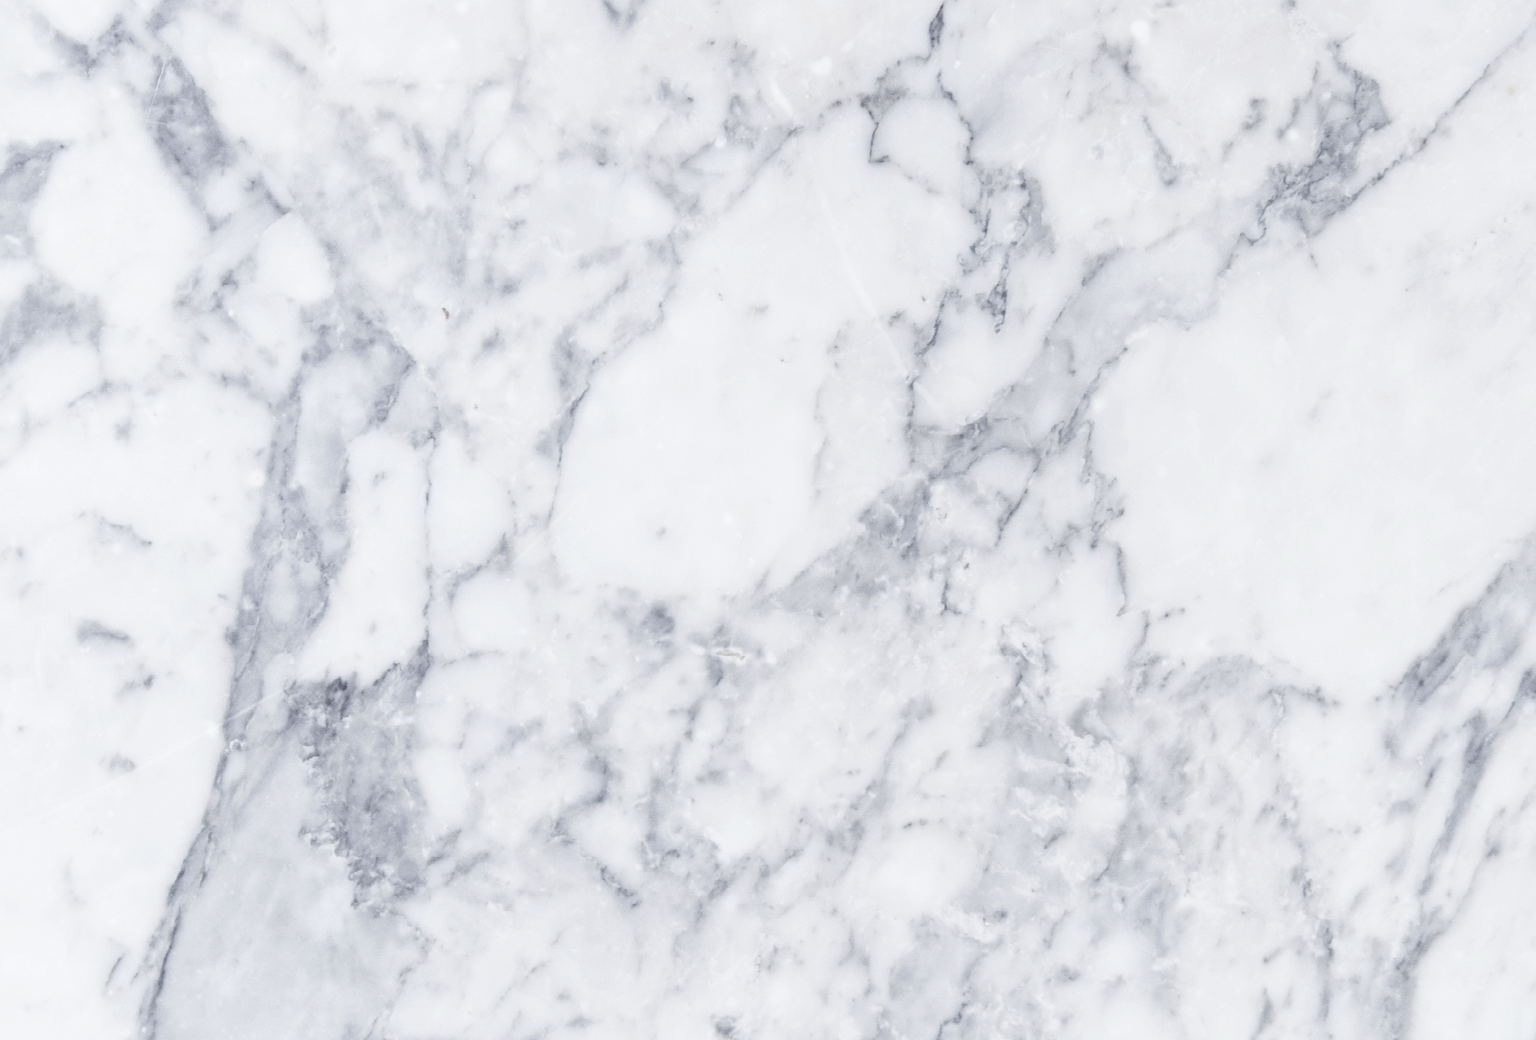 Buy 4K Mauve  White Marble Smartphone Wallpaper Iphone Online in India   Etsy